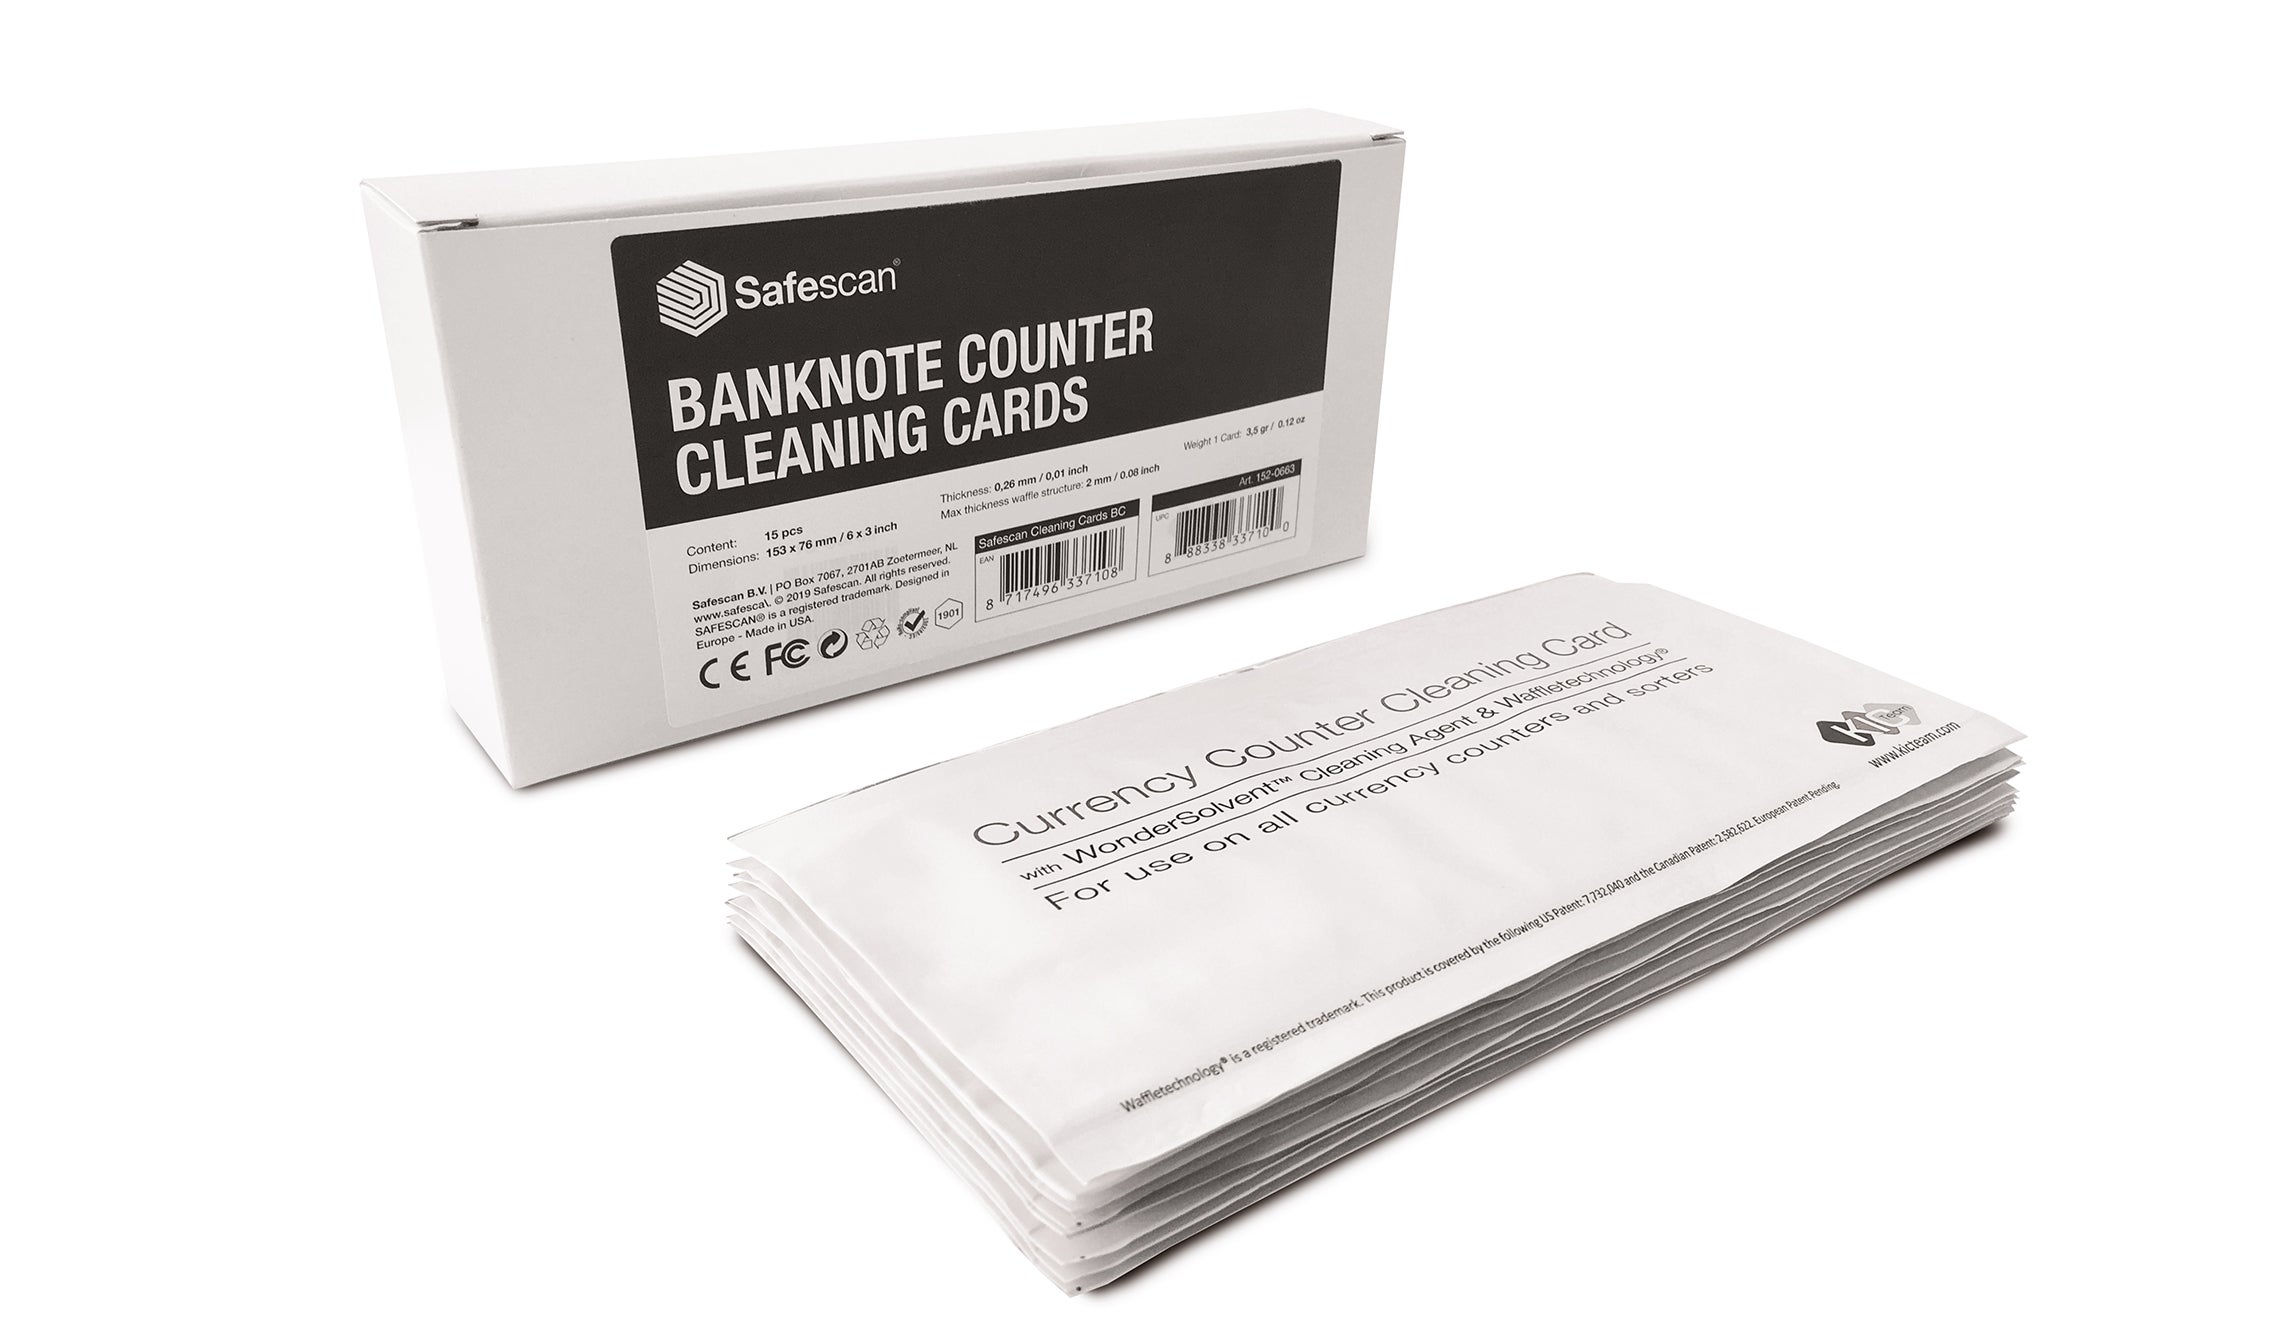 safescan-cleaning-cards-banknote-counters